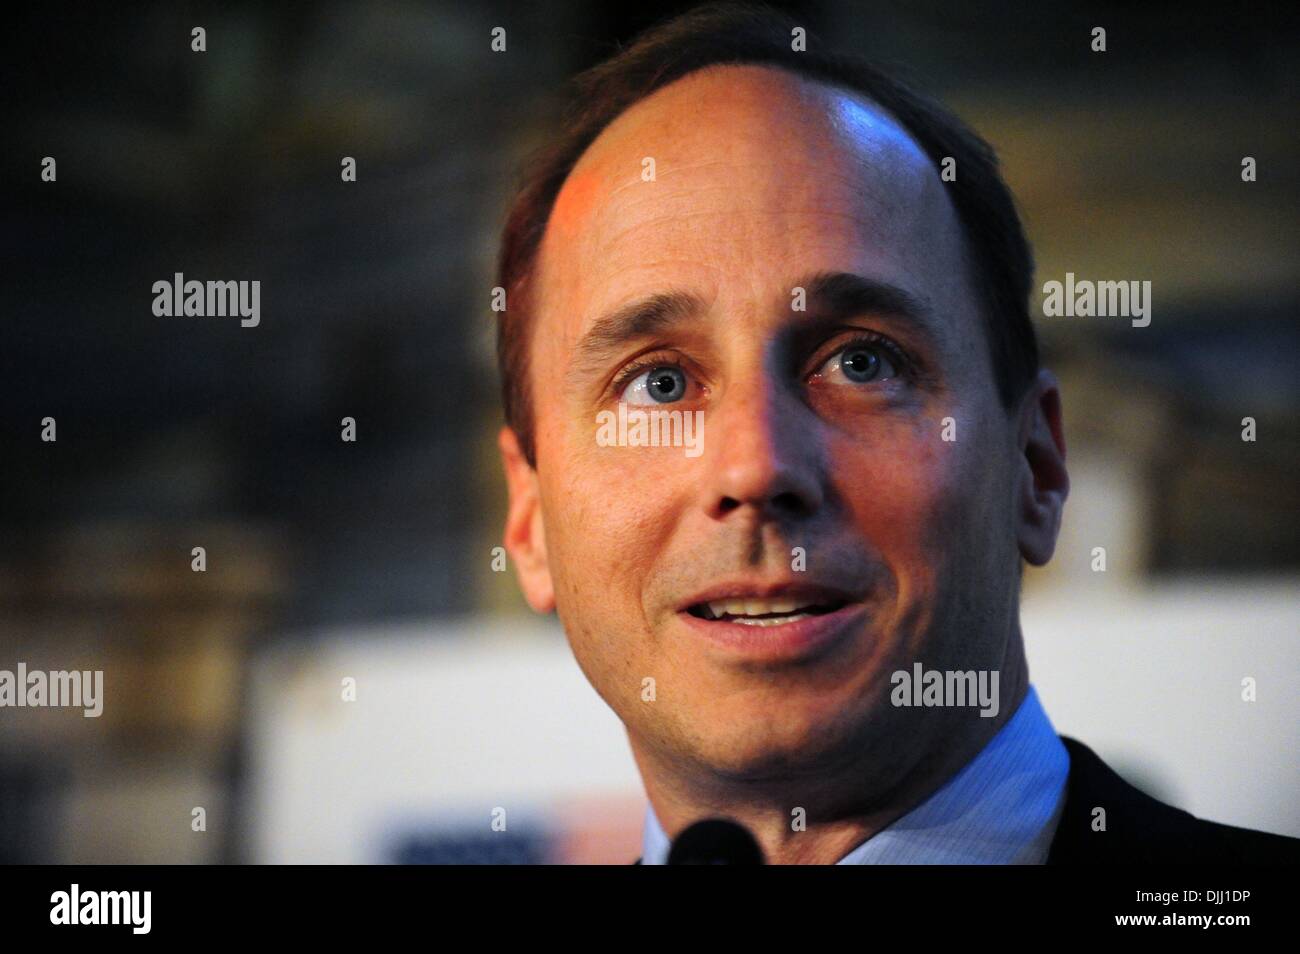 Aug. 06, 2010 - Manhattan, New York, U.S. - Inductee NY Yankees GM BRIAN CASHMAN speaks at the ceremony as Irish Americans are inducted into the Irish American Baseball Hall of Fame at Foley's NY Pub & Restaurant on West 33rd Street. (Credit Image: Â© Bryan Smith/ZUMApress.com) Stock Photo